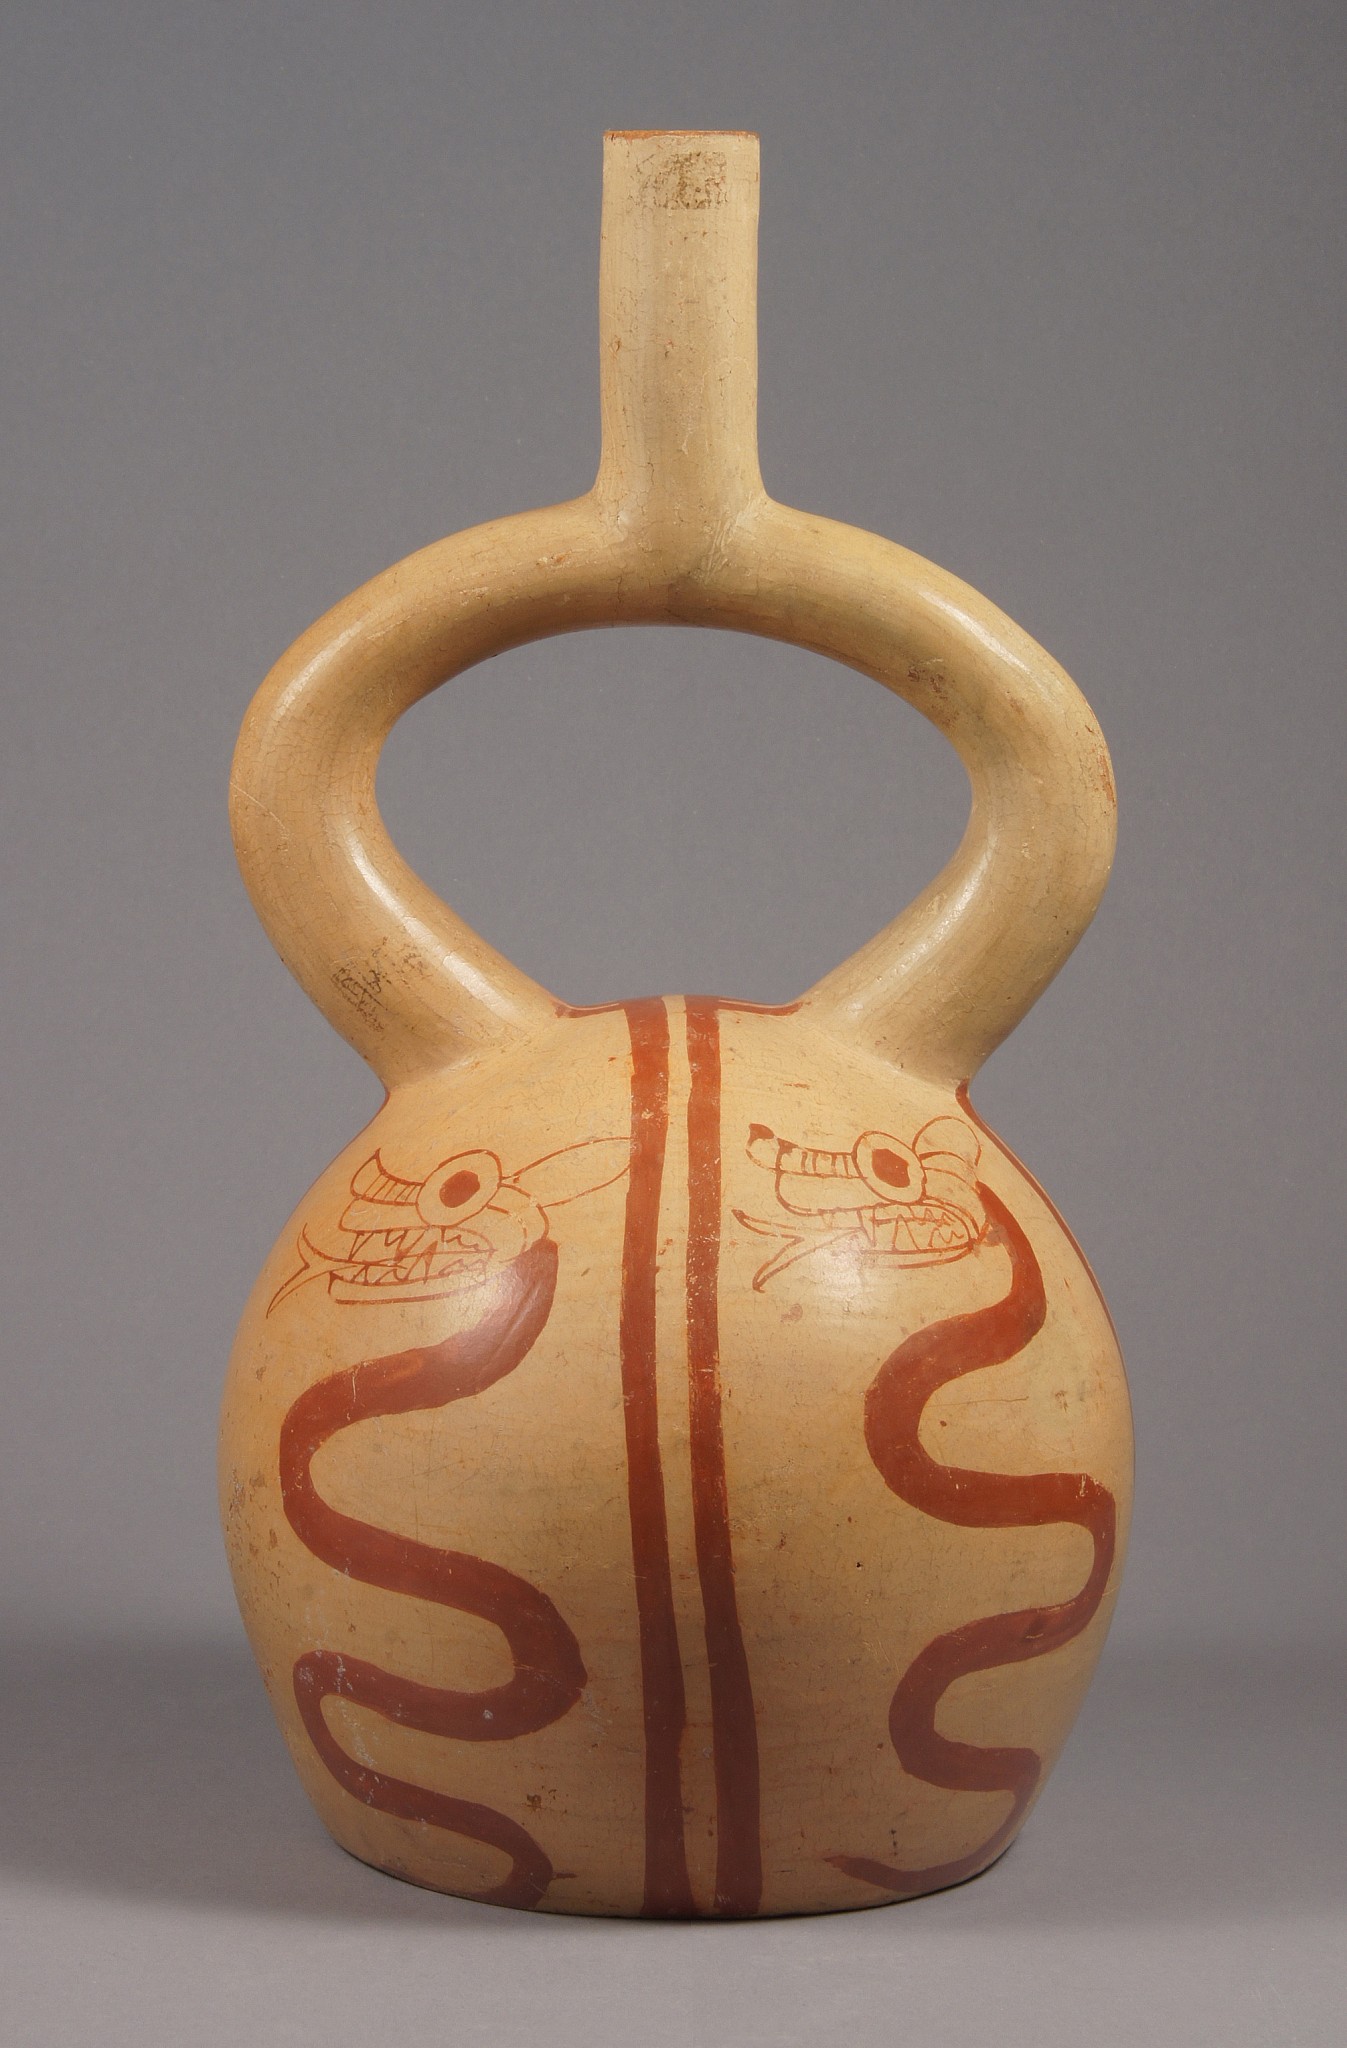 Peru, Moche IV fine line ceramic stirrup spout vessel of Serpents
A large stirrup spout vessel painted with four undulating serpents facing upwards, one in each quadrant in red/brown on a beige ground.  The serpent represents rebirth, the shedding of its skin repeating as much as four times, perhaps for each season. Stirrup spout vessels were used  to hold  ceremonial corn beer and the spout allowed  the air to enter one channel while the liquid was able to pour  through the other channel.
Media: Ceramic
Dimensions: Height 11 1/2"
$4,500
90078